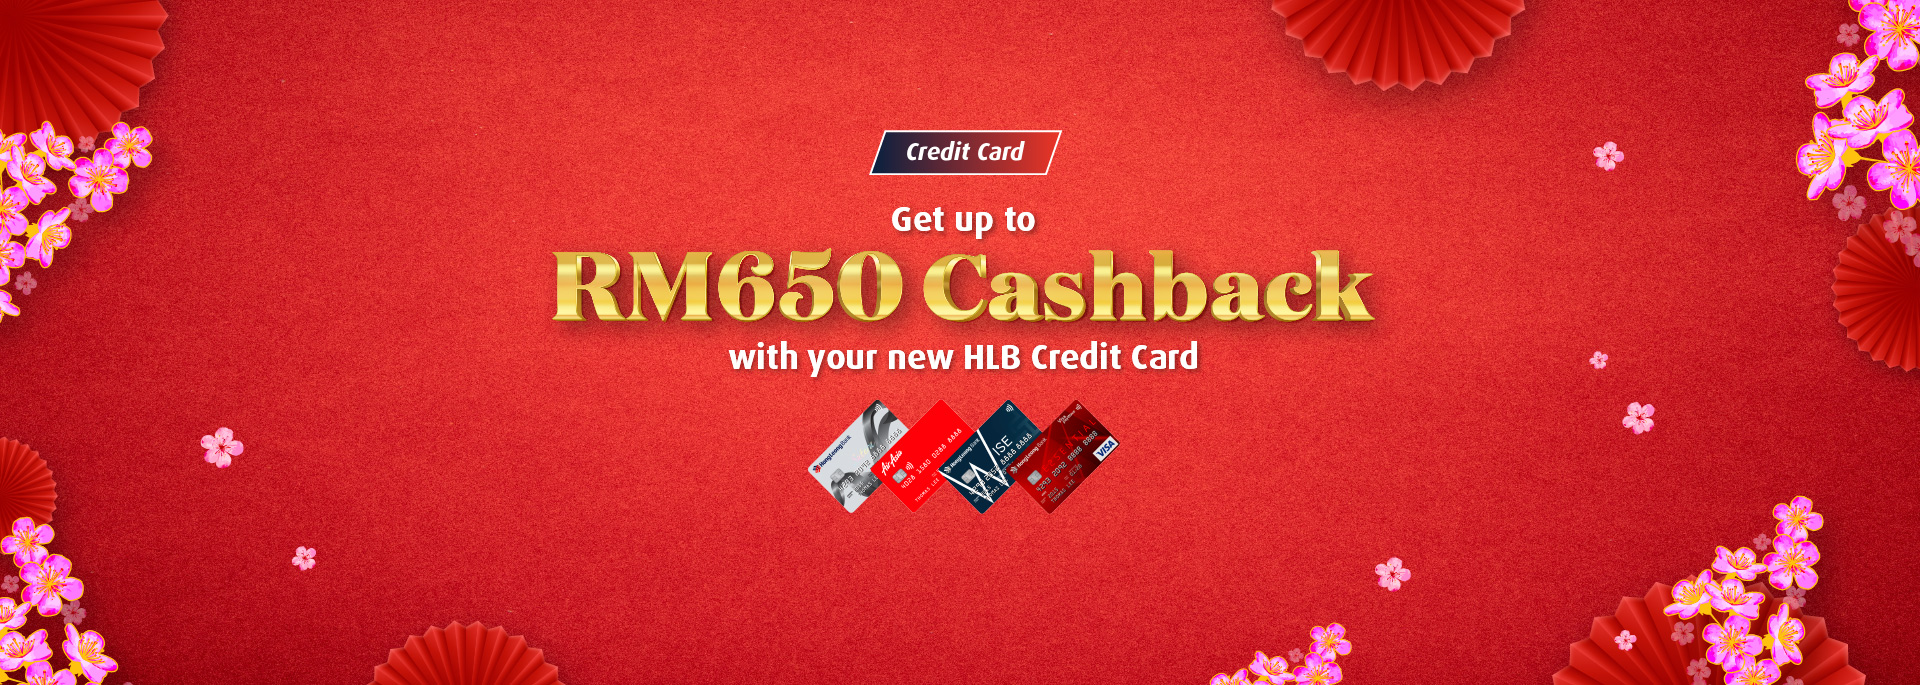 Get up to RM650 Cashback with your new HLB Credit Card